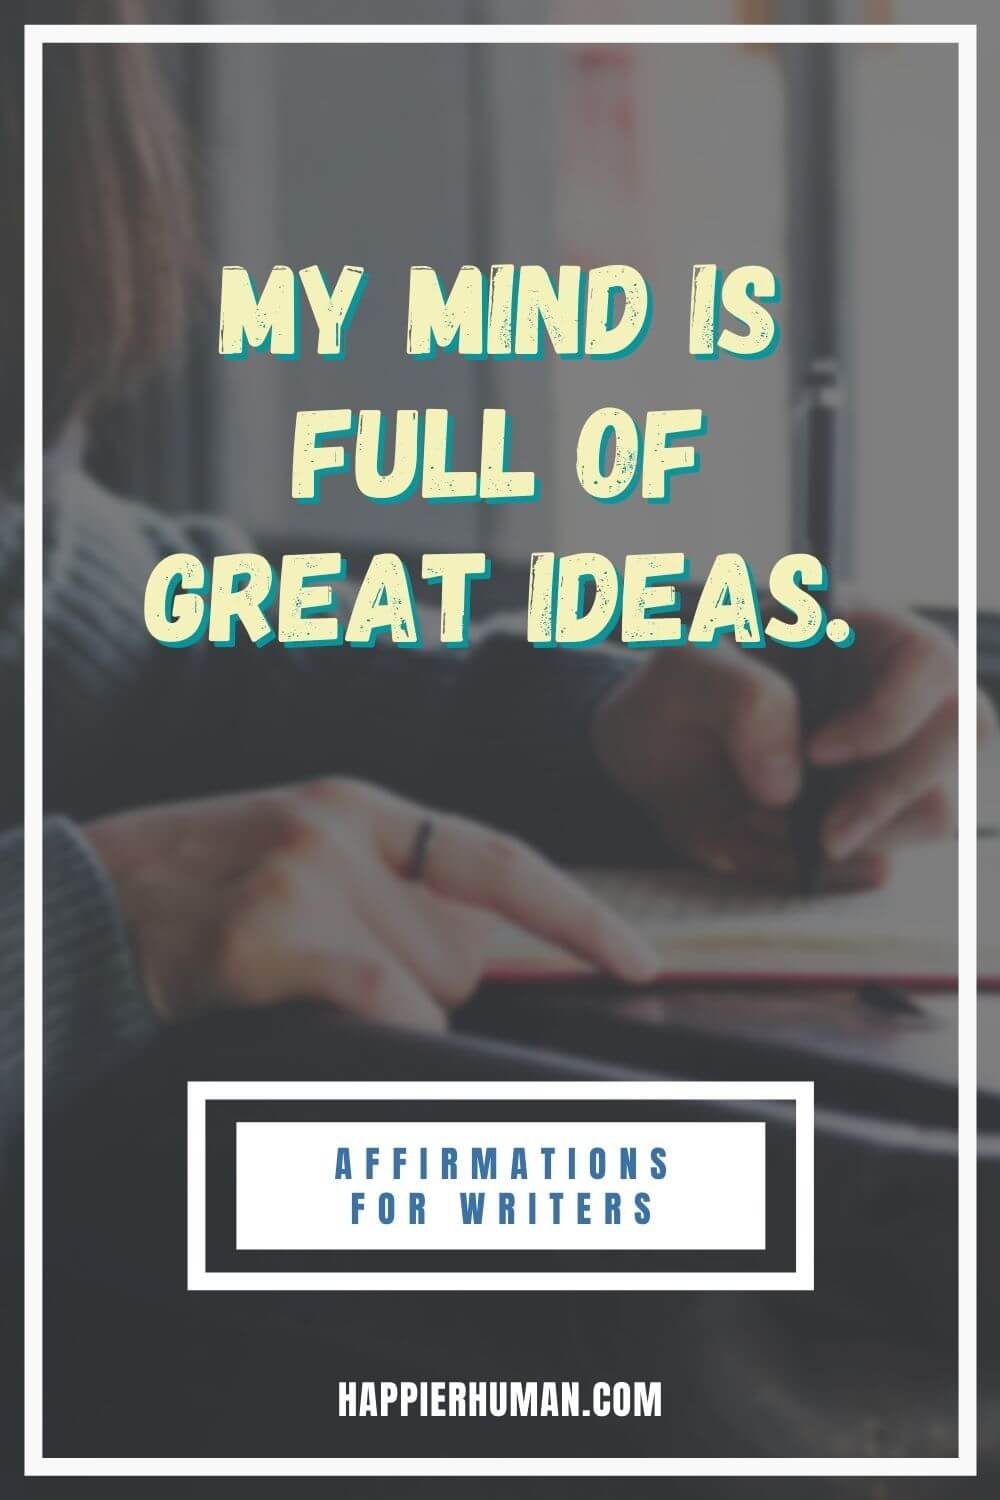 Affirmations for Writers - | My mind is full of great ideas. | affirmations for creativity | positive affirmations writing | writers affirmation poem